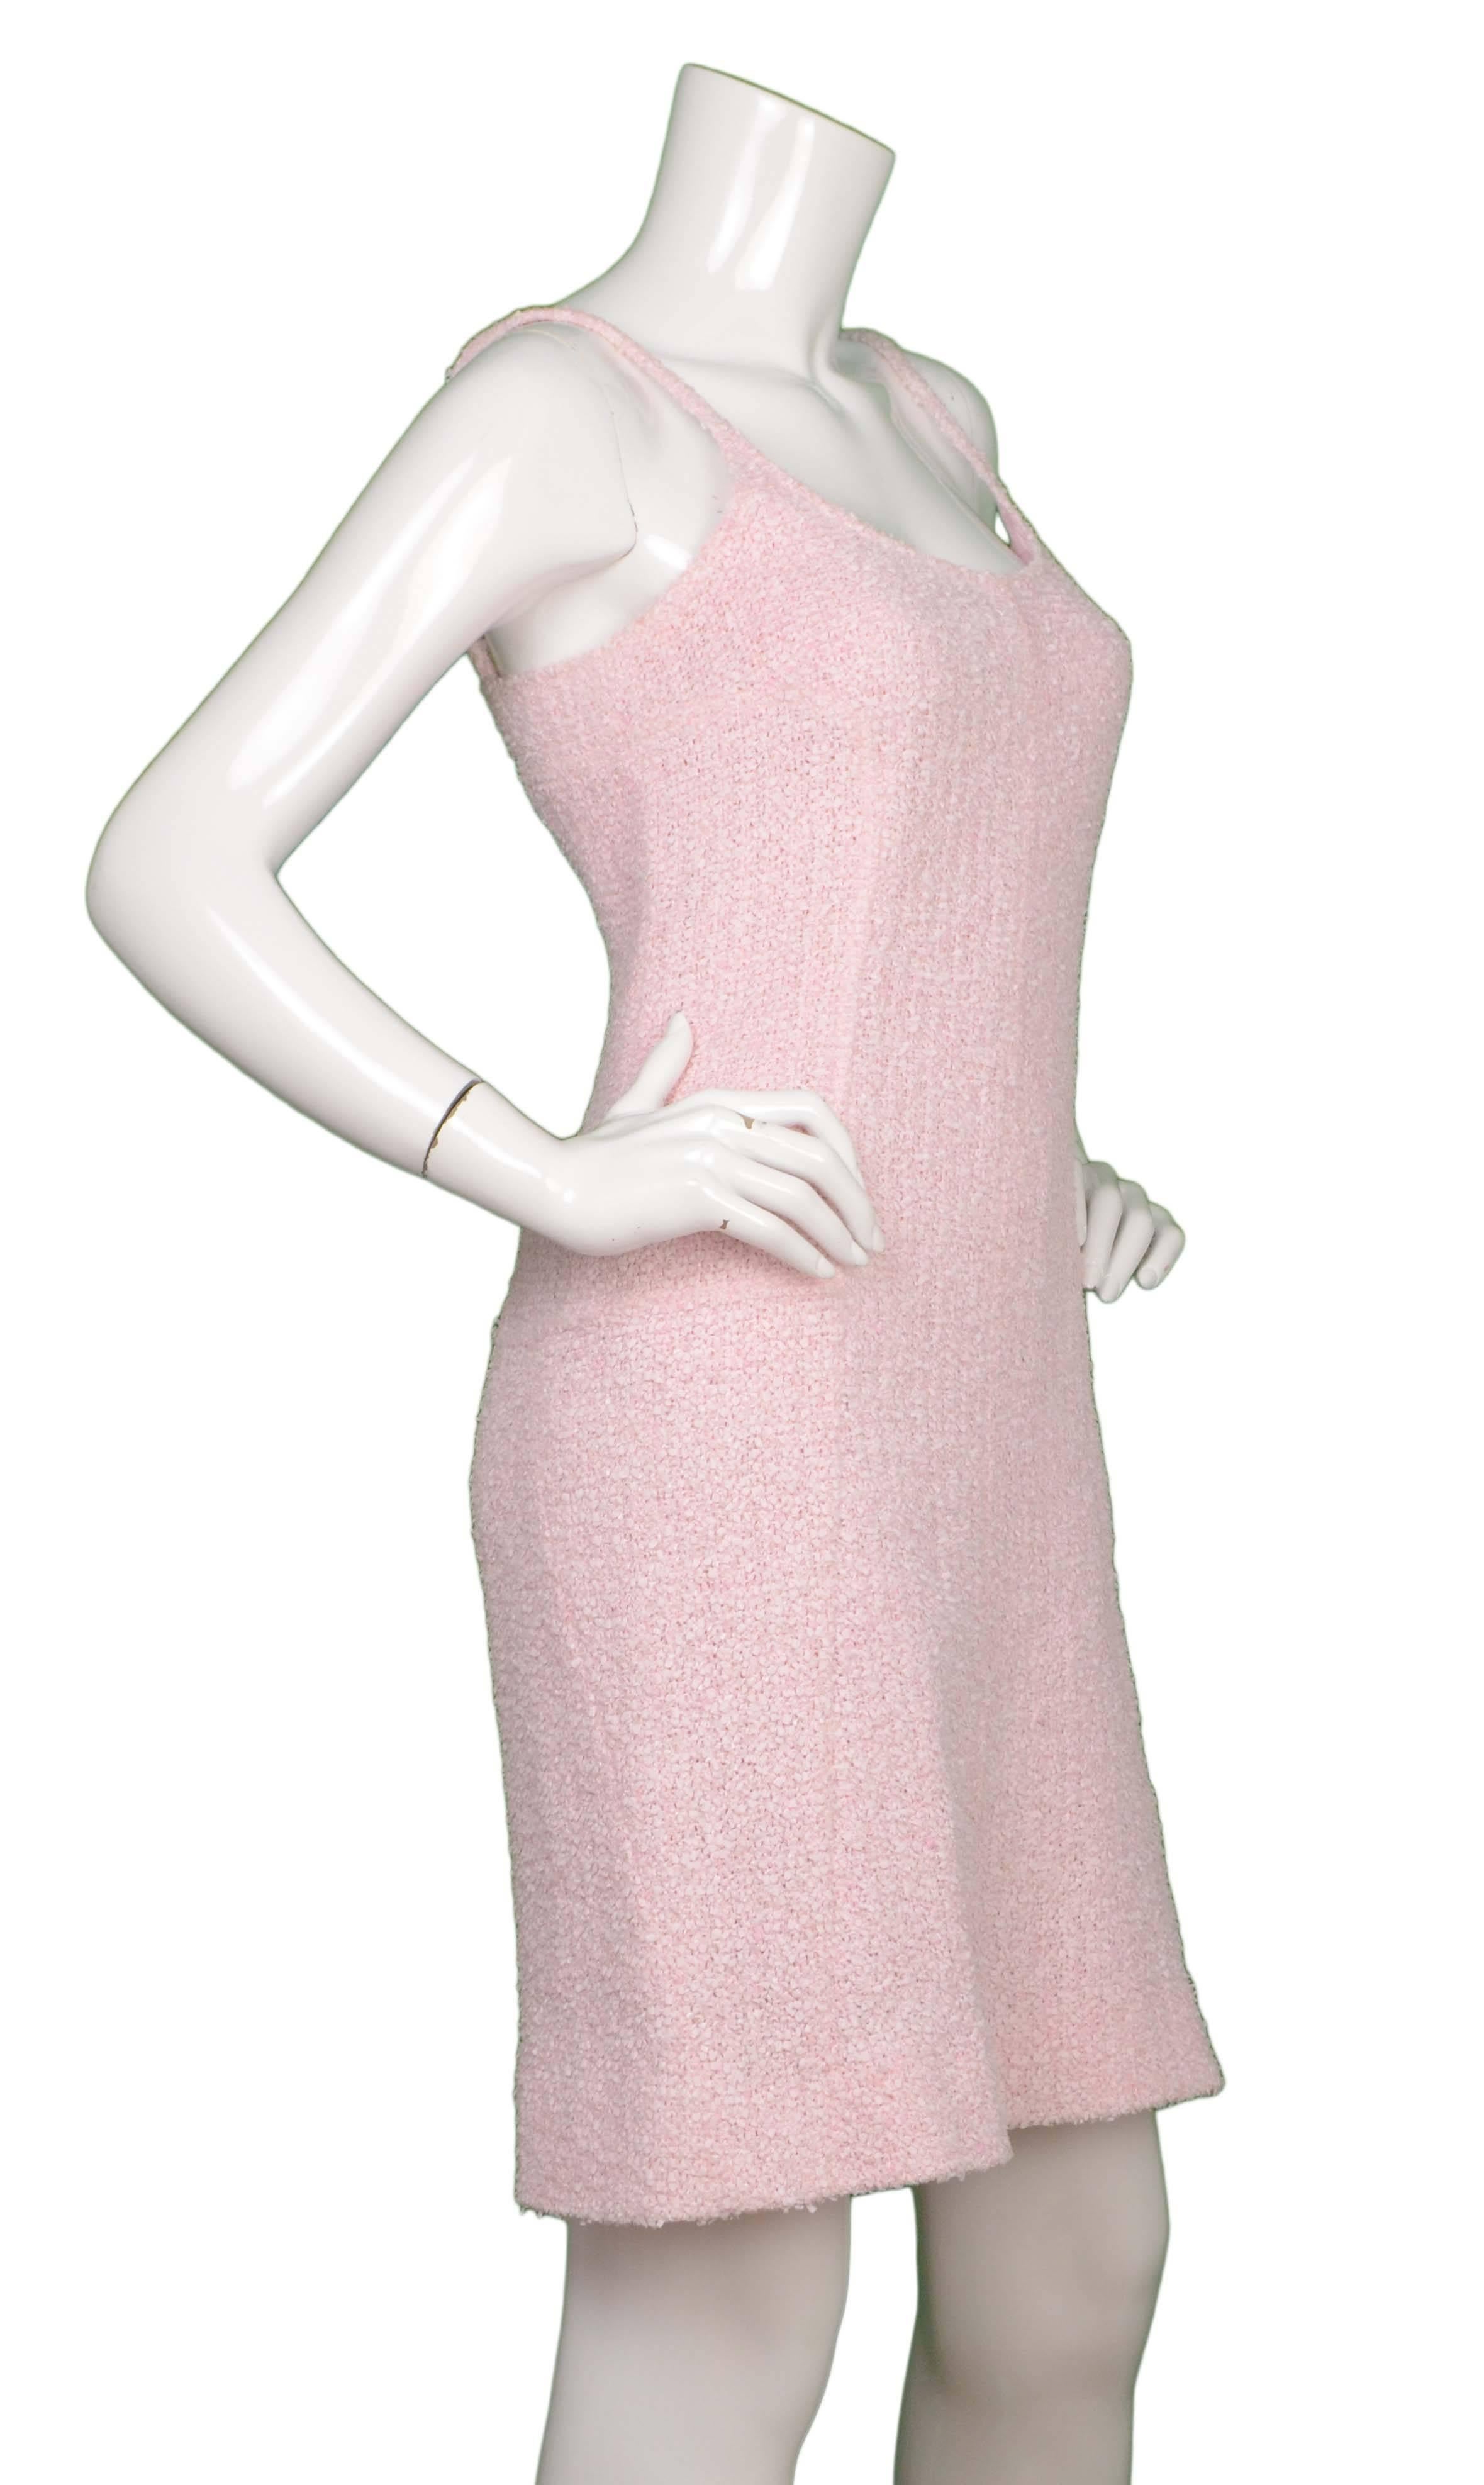 Chanel Pink Boucle Spaghetti Strap Dress 
Features cut out in back with bra style closure
Made In: France
Year of Production: 2004
Color: Pink
Composition: 55% nylon, 33% cotton, 5% rayon, 4% wool, 3% linen
Lining: Pink, 100%